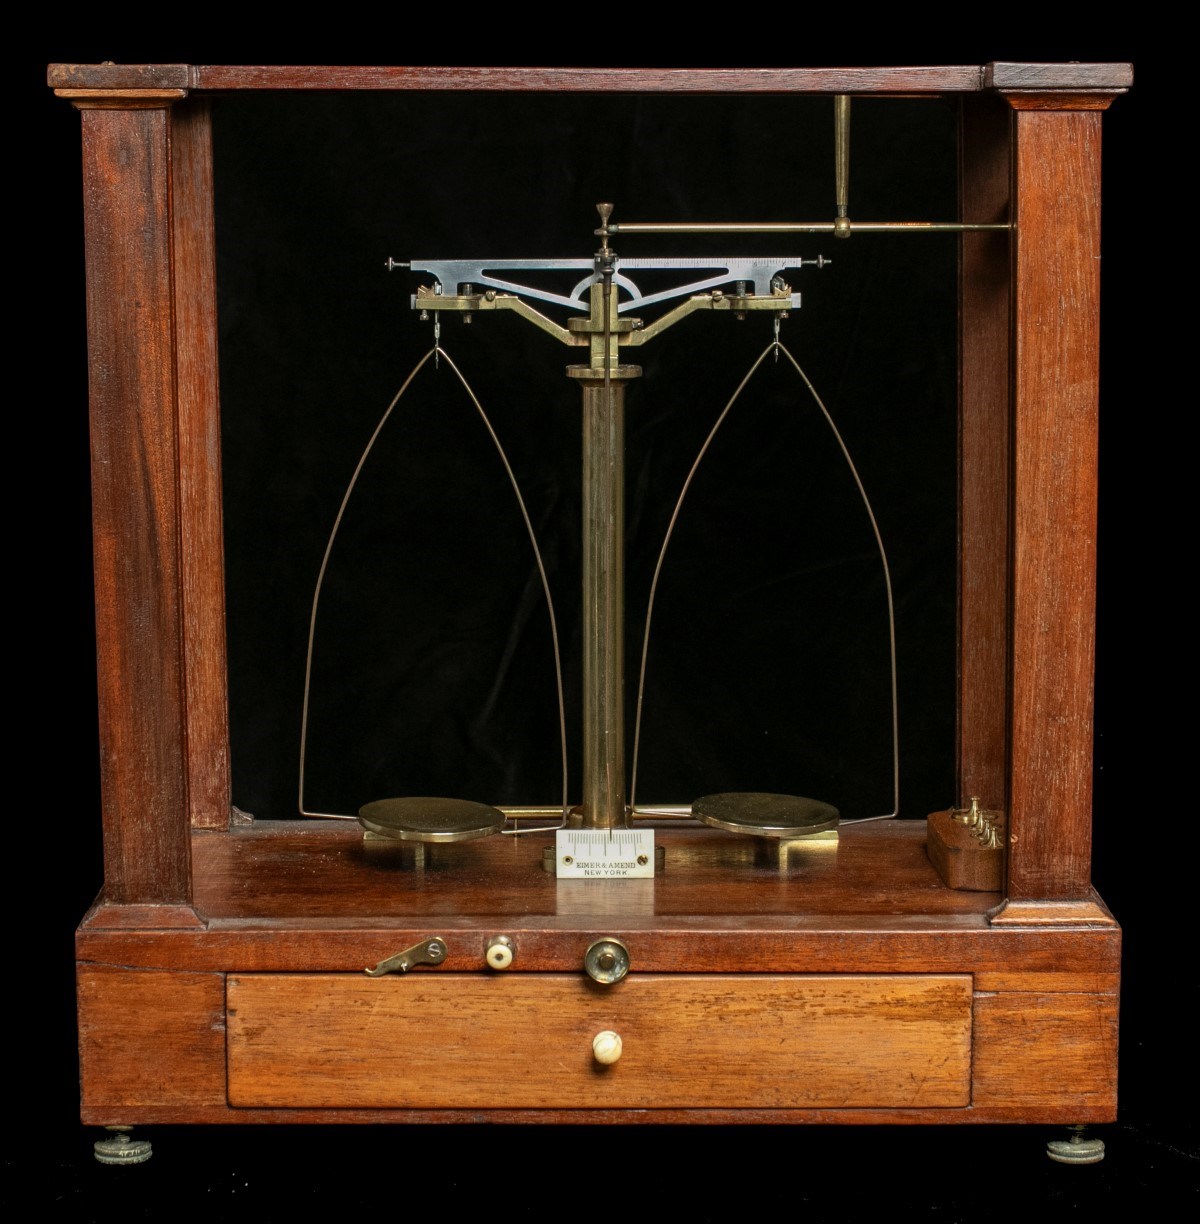 An apothecary scale consisting of two brass metal balances. The scale is inside an antique wooden display case.